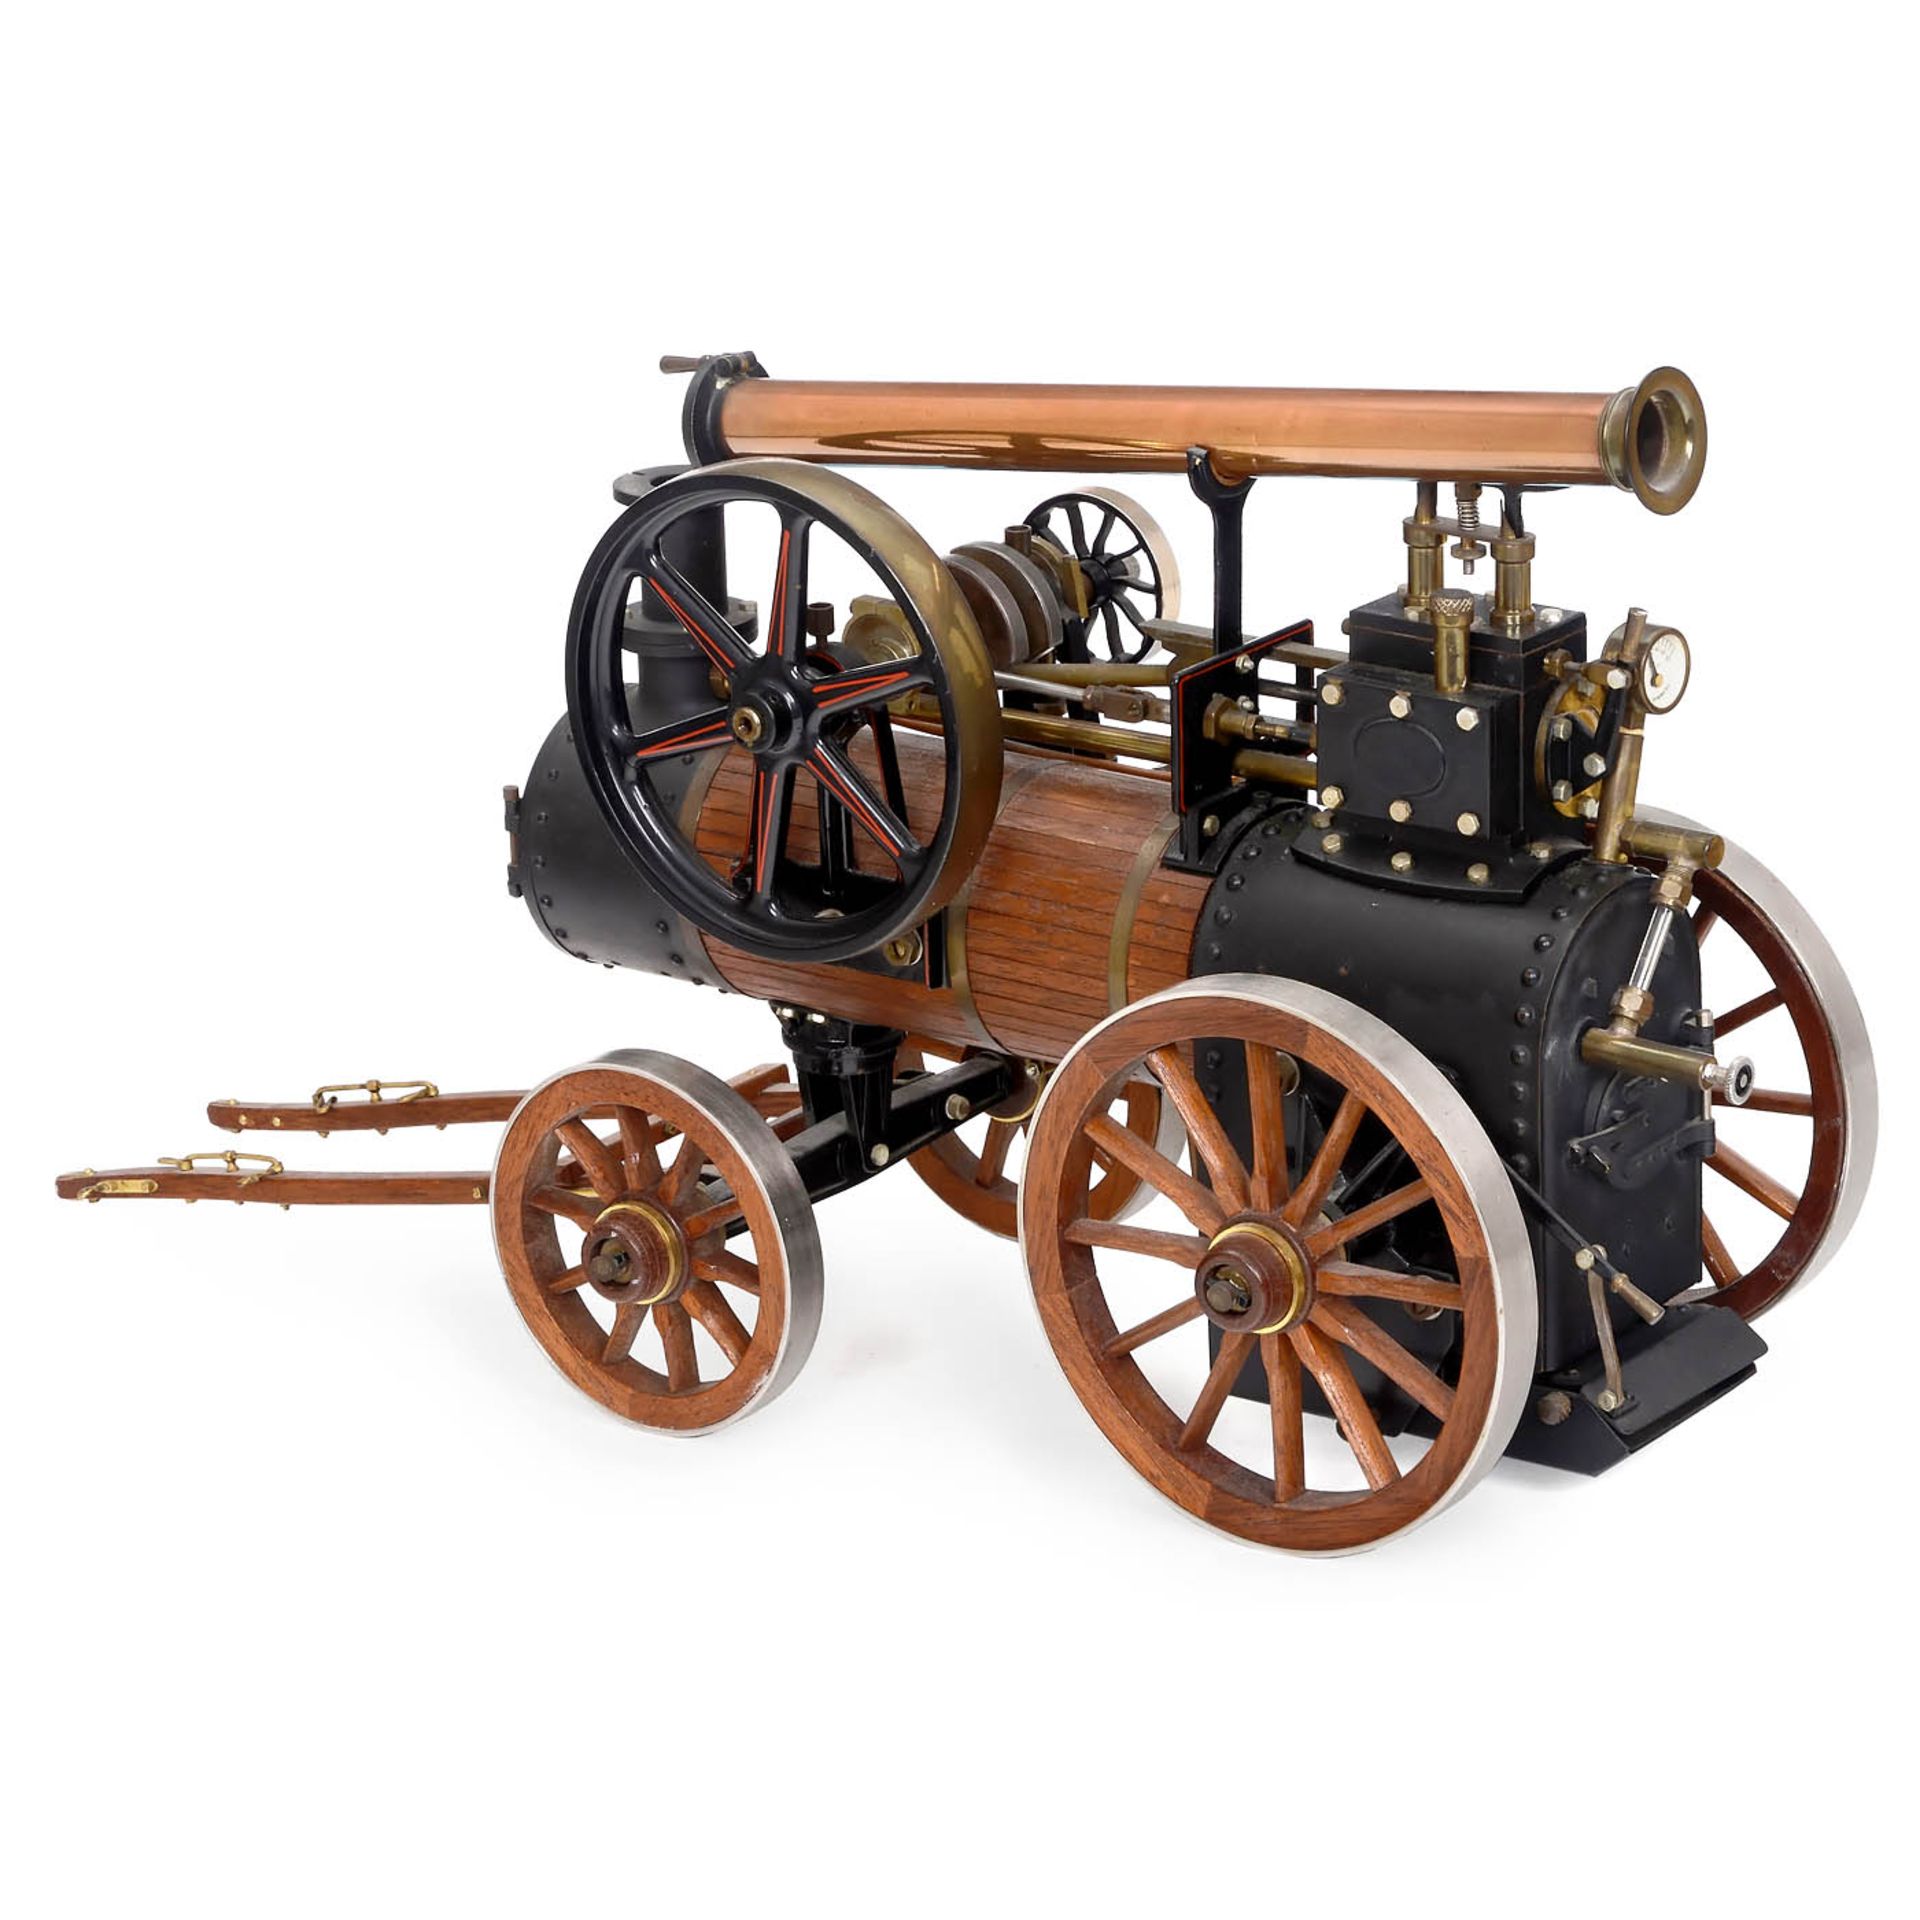 1-Inch Scale Model of a Horse-Drawn Portable En­gine, c. 1980 - Image 2 of 2